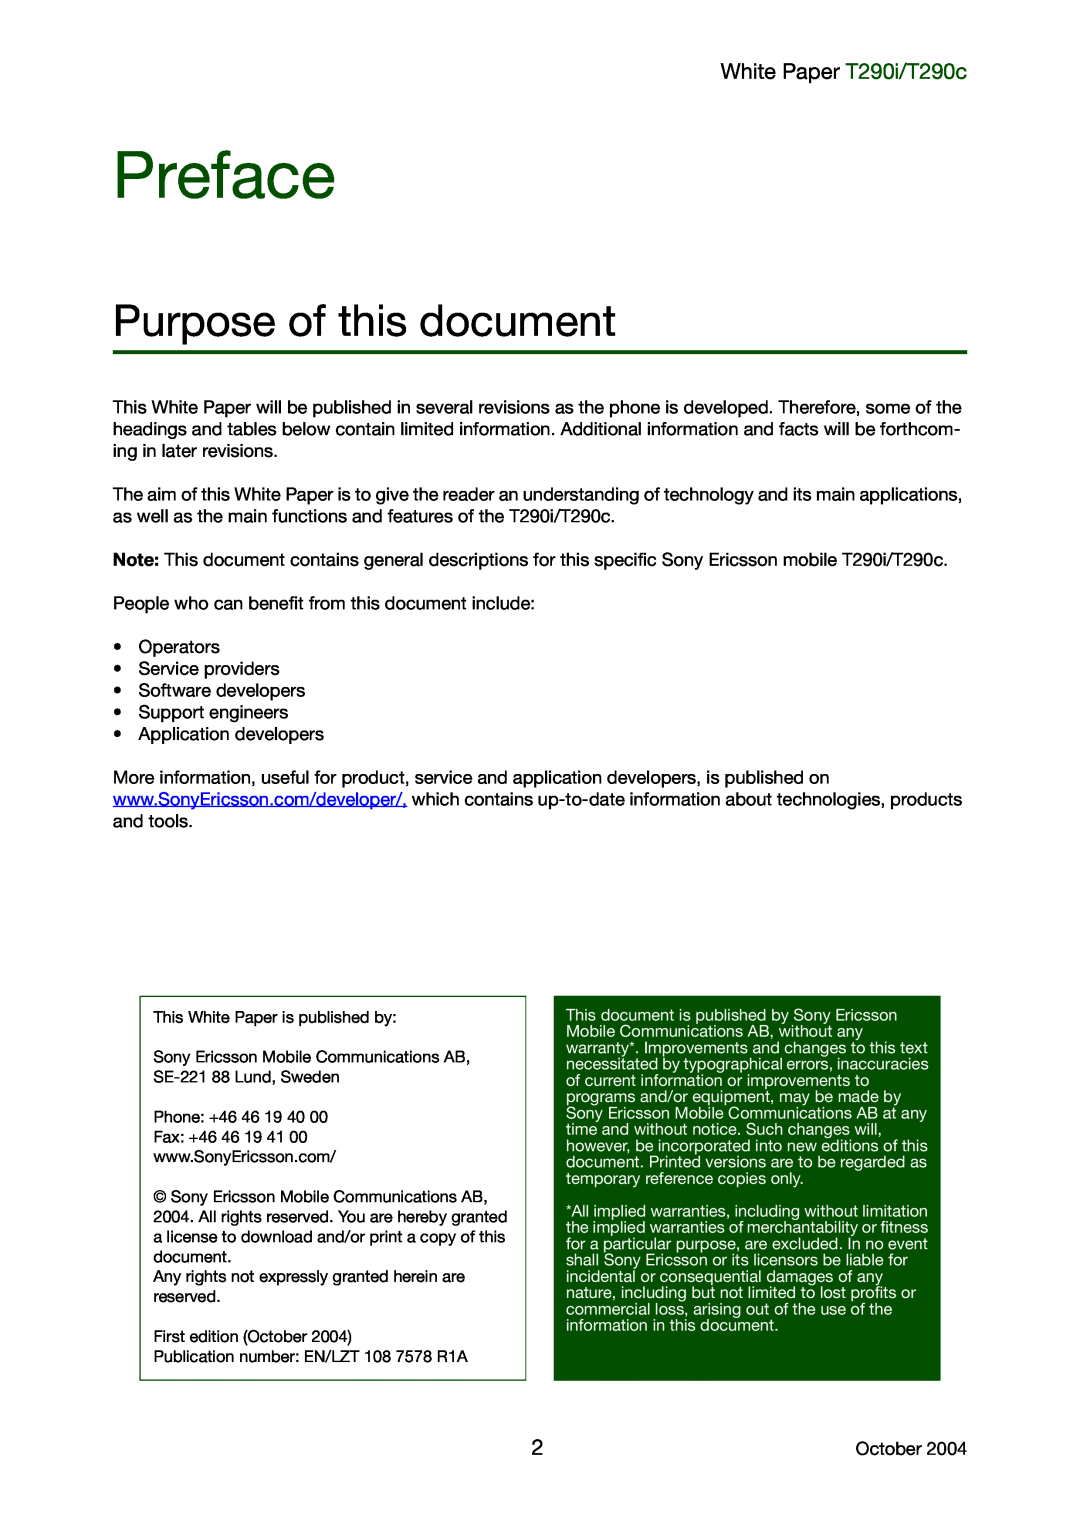 Sony Ericsson manual Preface, Purpose of this document, White Paper T290i/T290c 